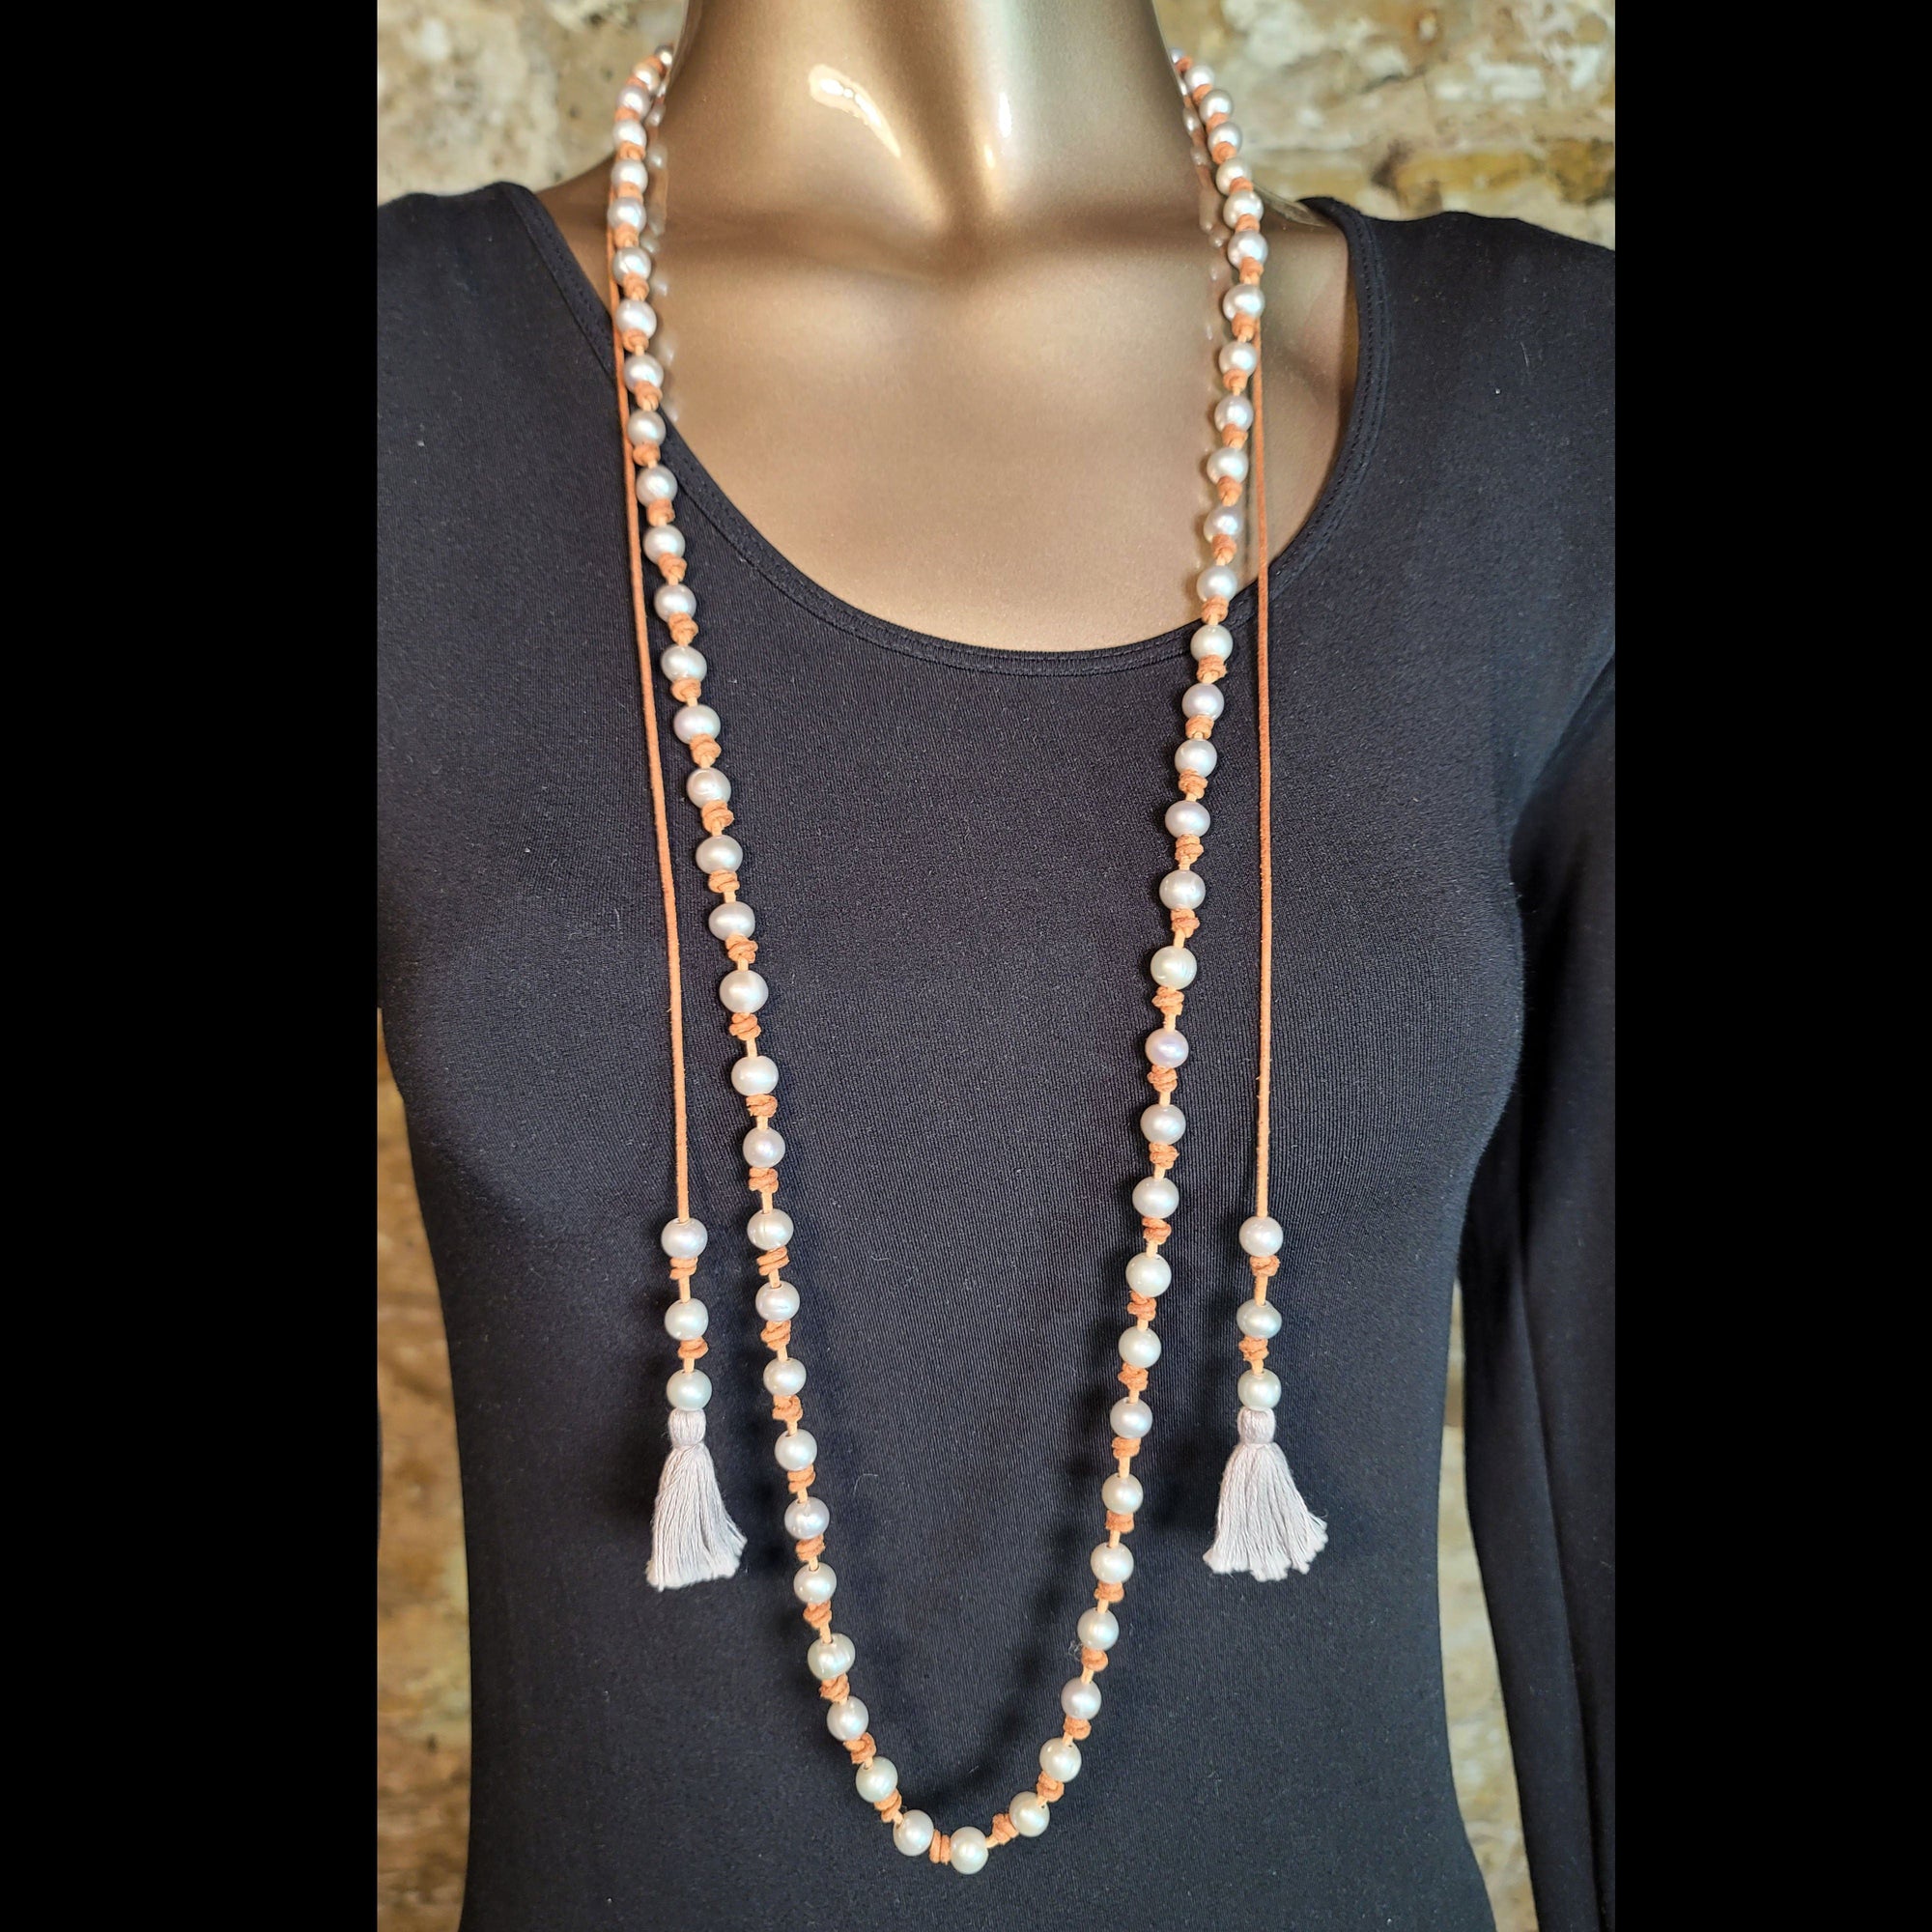 Pearl/Leather/Tassel Necklace - N566